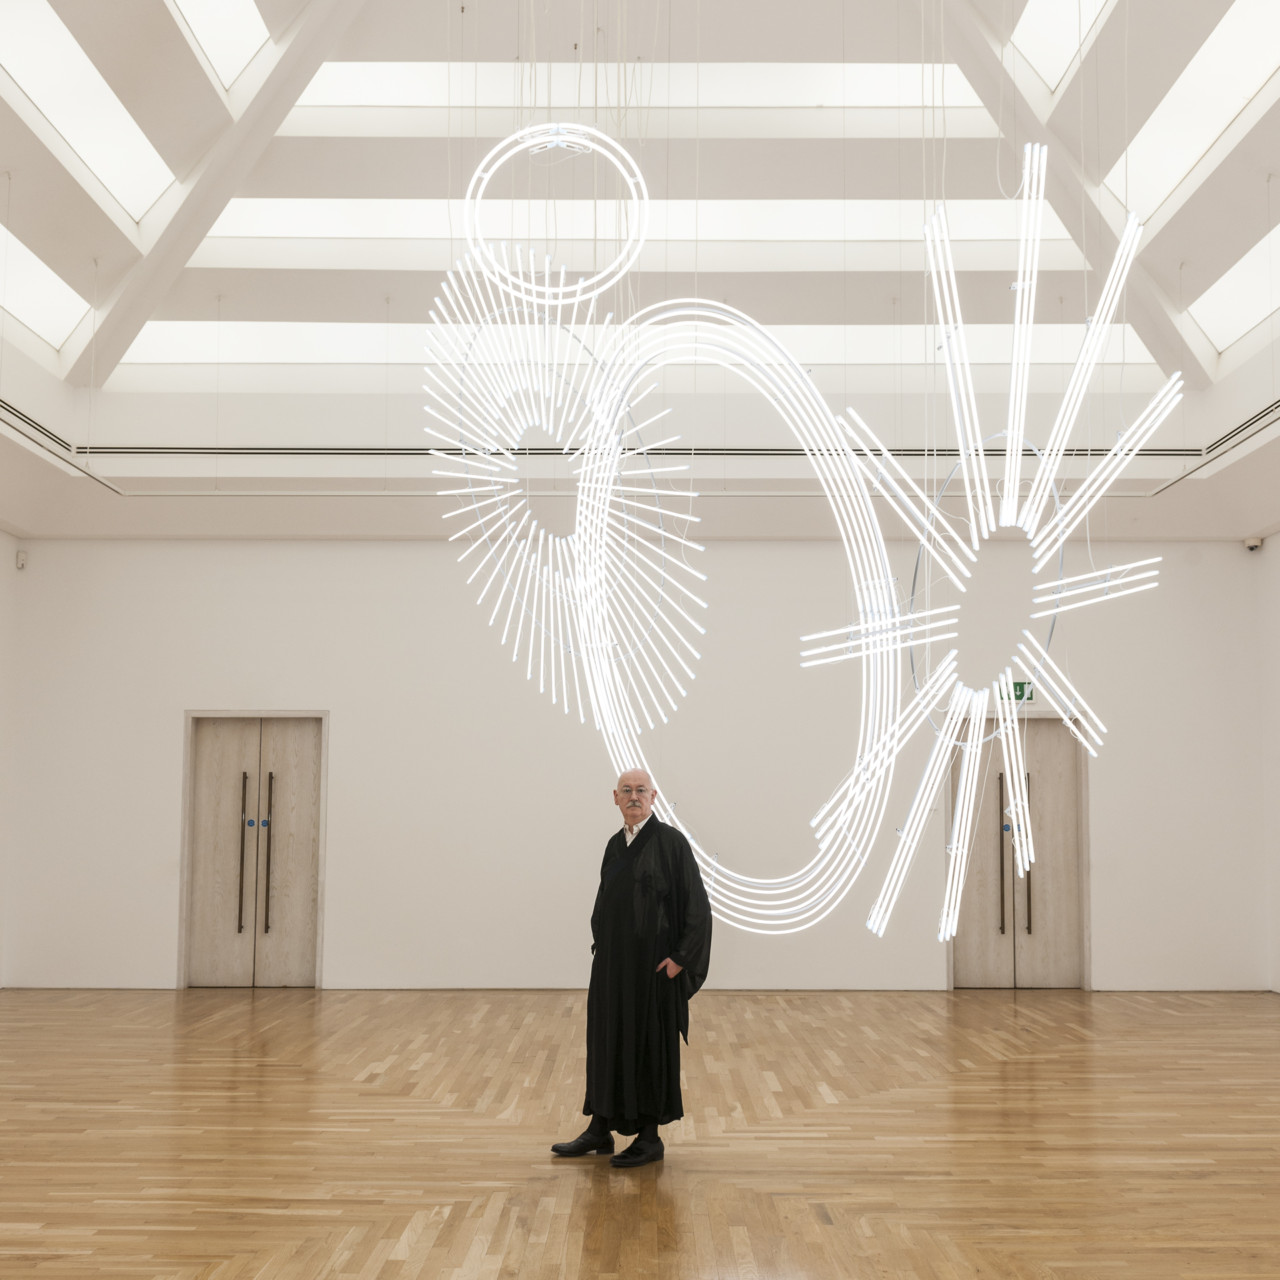 Cerith Wyn Evans, Radiant fold (…the Illuminating Gas), 2017/18. Presented to Amgueddfa Cymru – National Museum Wales by the  Contemporary Art Society through Great Works, supported by the Sfumato Foundation, 2018. © Cerith Wyn Evans.